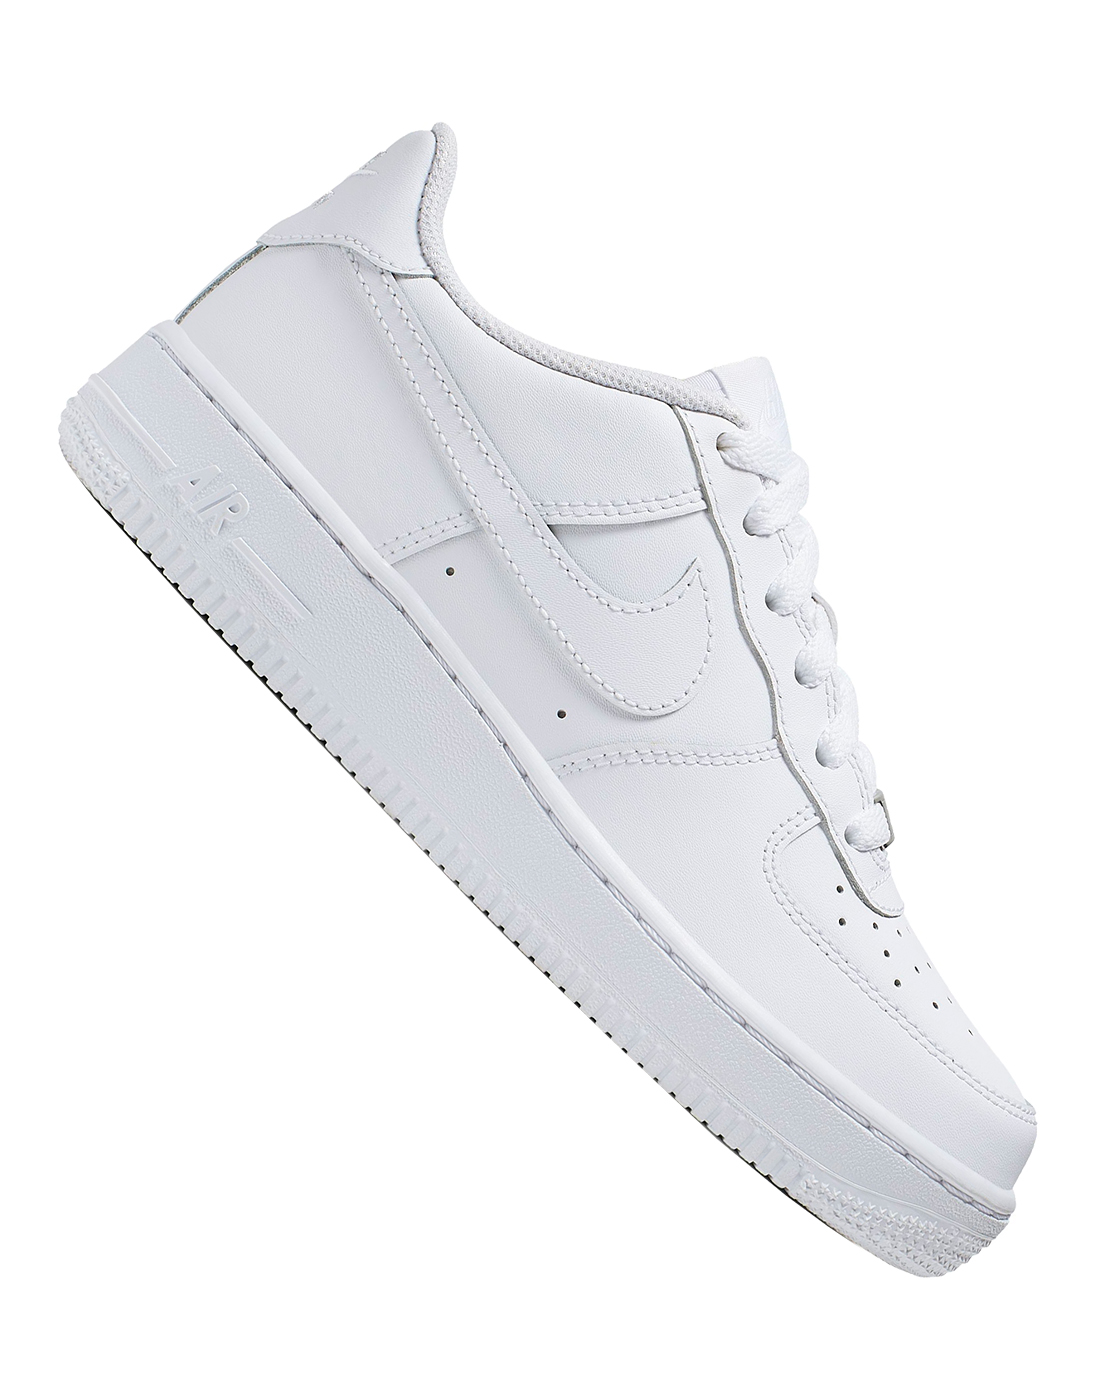 junior nike air force 1 size 4